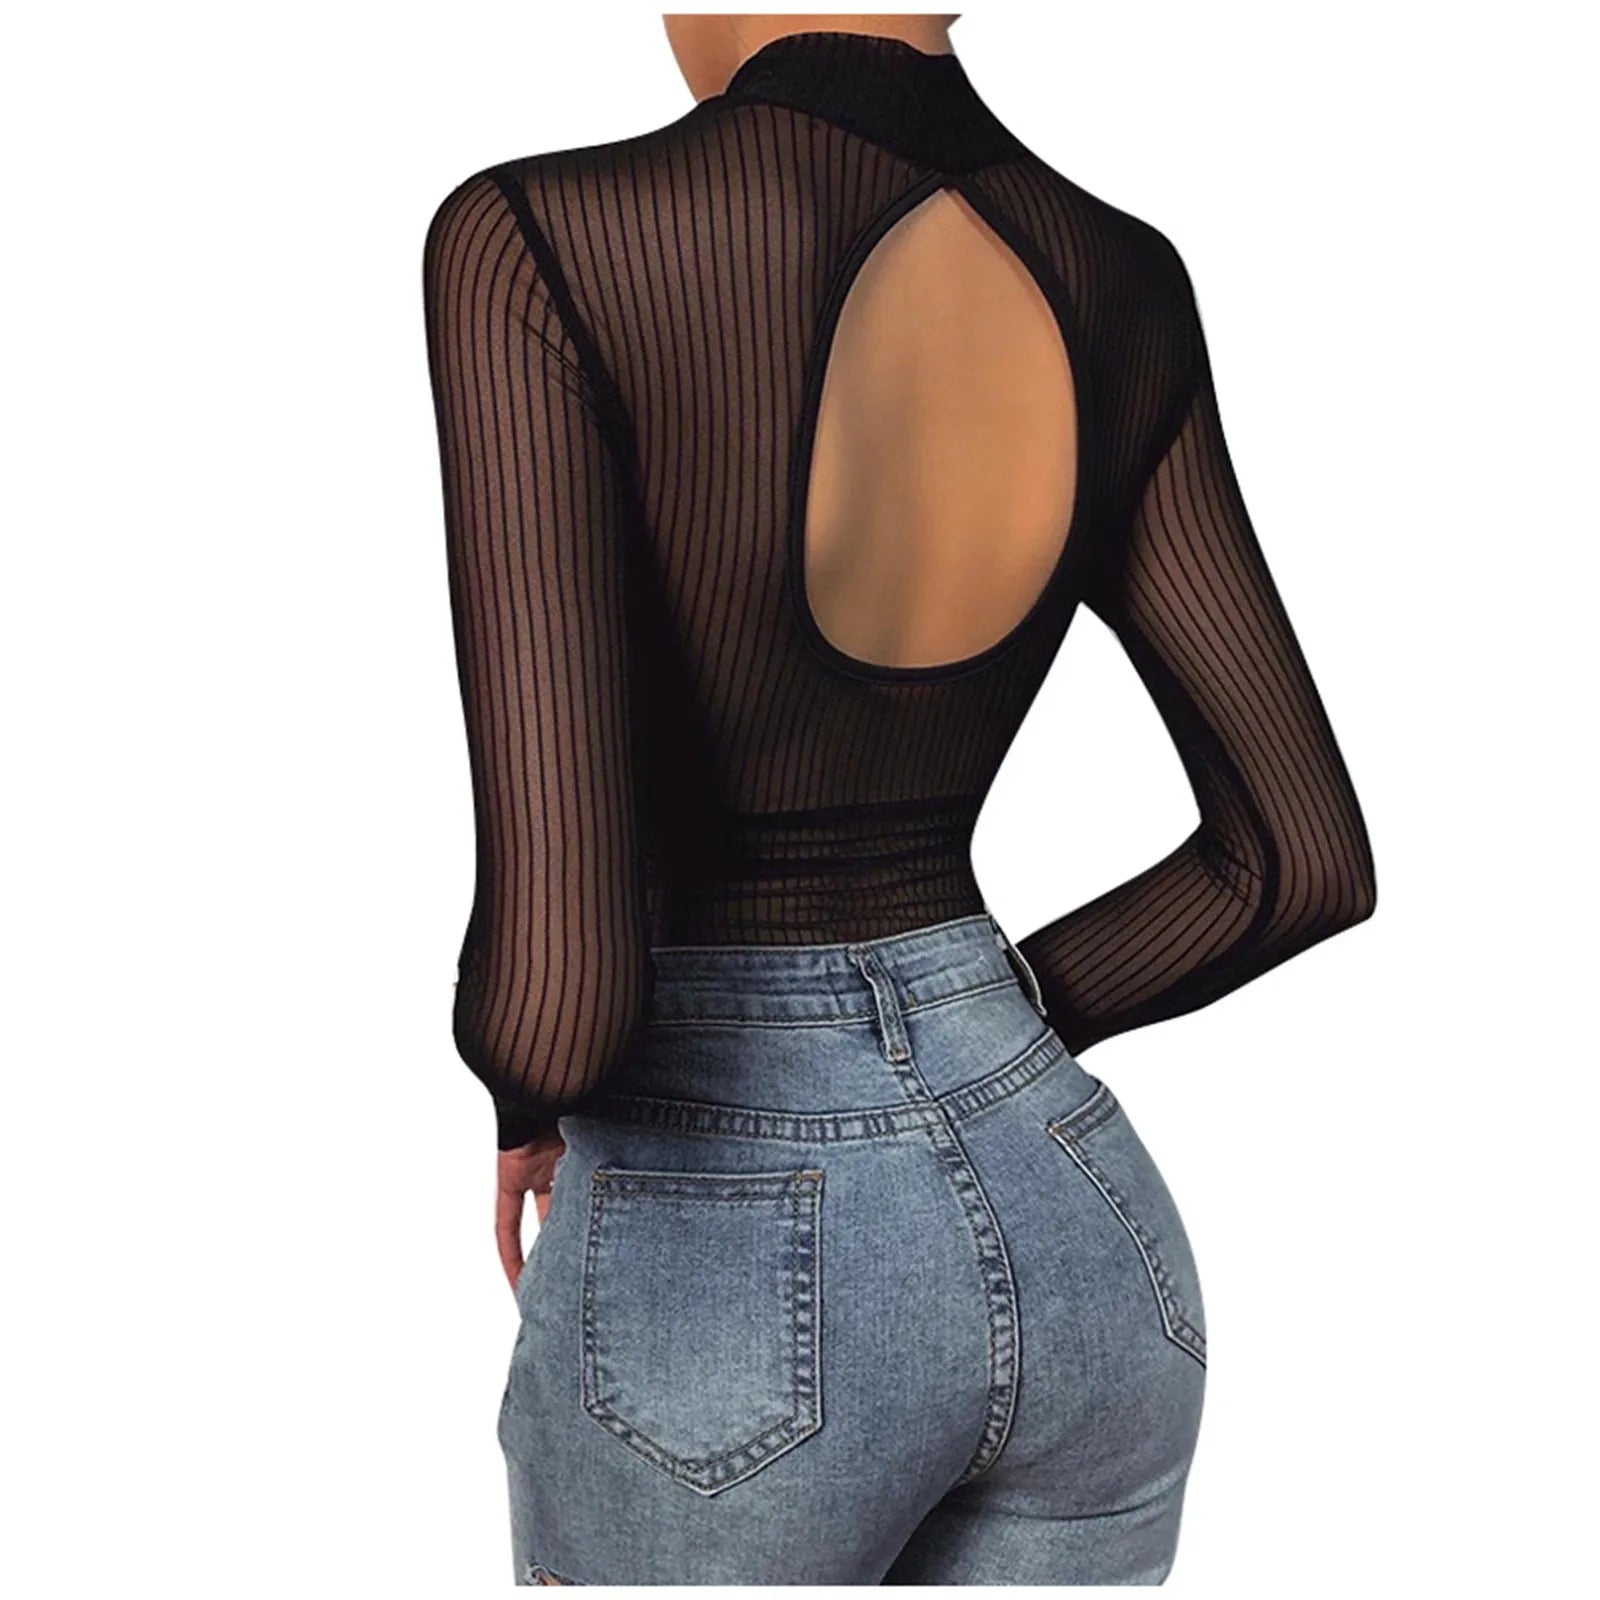 Hollow Open Back Triangle Fashion Slim Fit High Neck Jumpsuit For Women Top Mujer